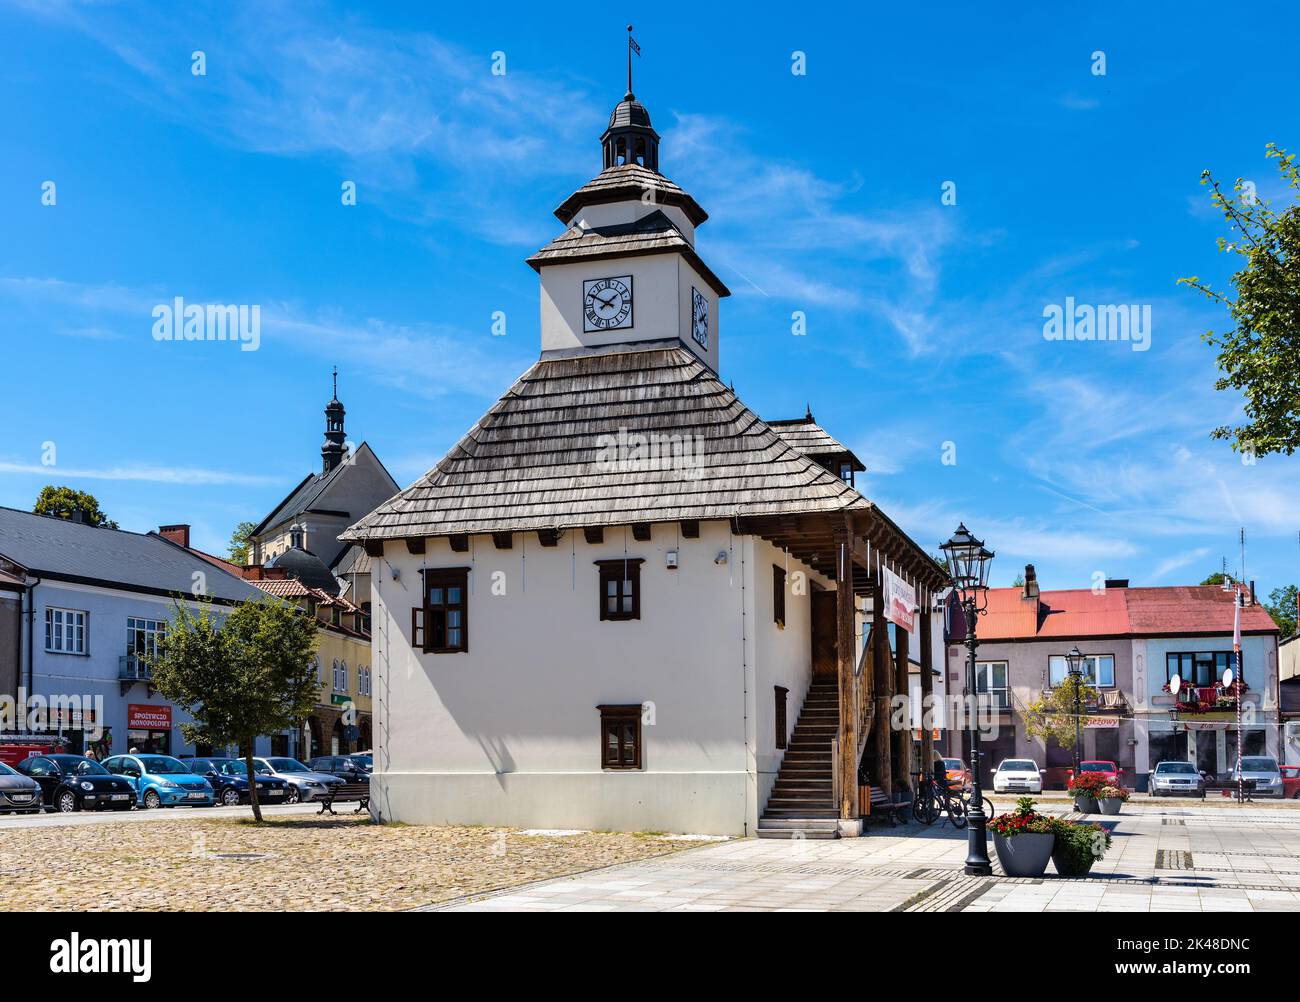 Pilica, Poland - July 25, 2022: Historic Town Hall Ratusz Miejski at Rynek Main Market square in old town quarter of Pilica in Silesia region Stock Photo